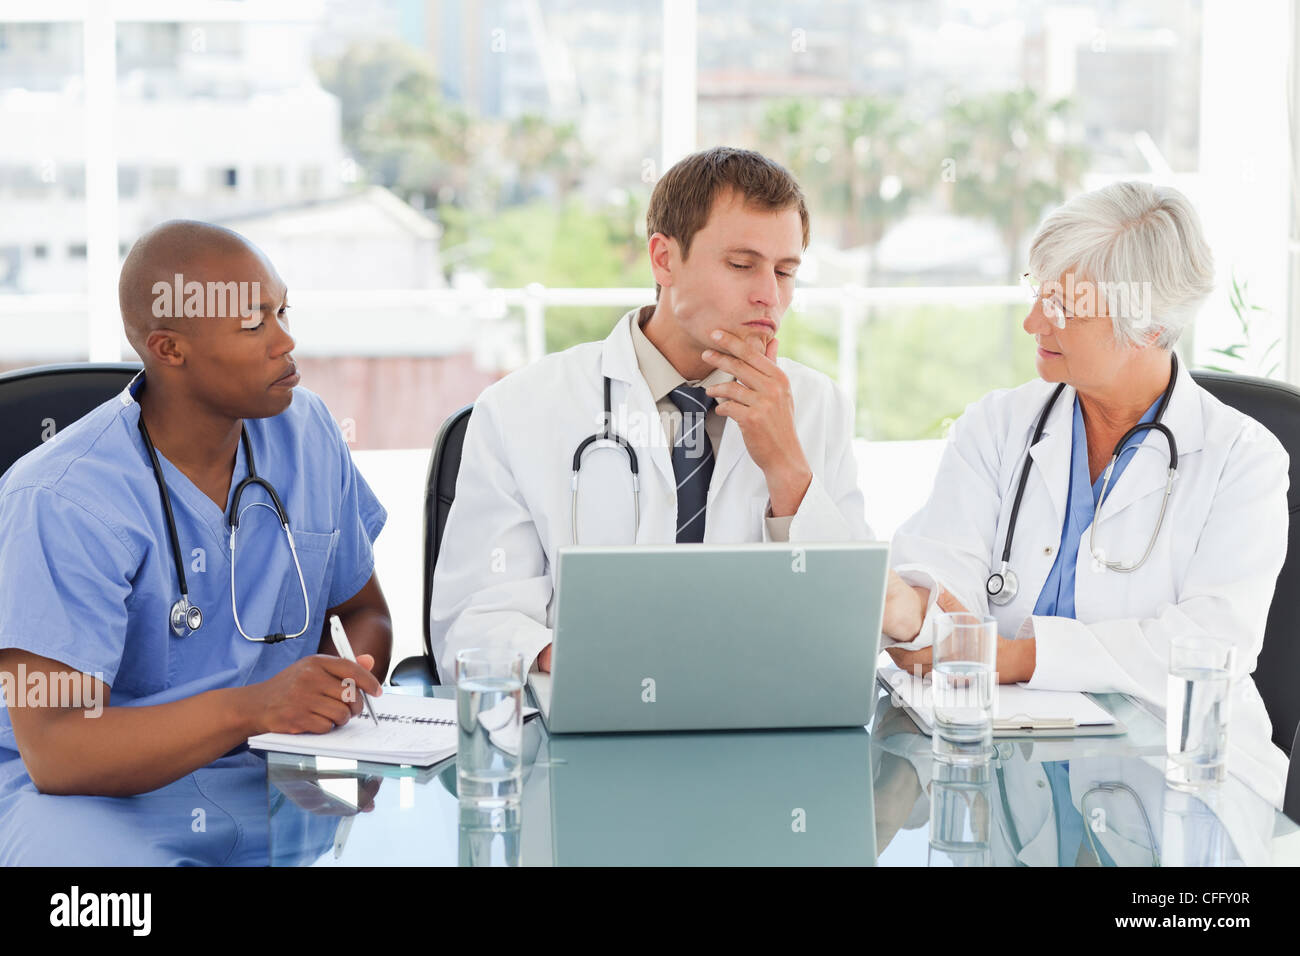 Doctors in a meeting room Stock Photo